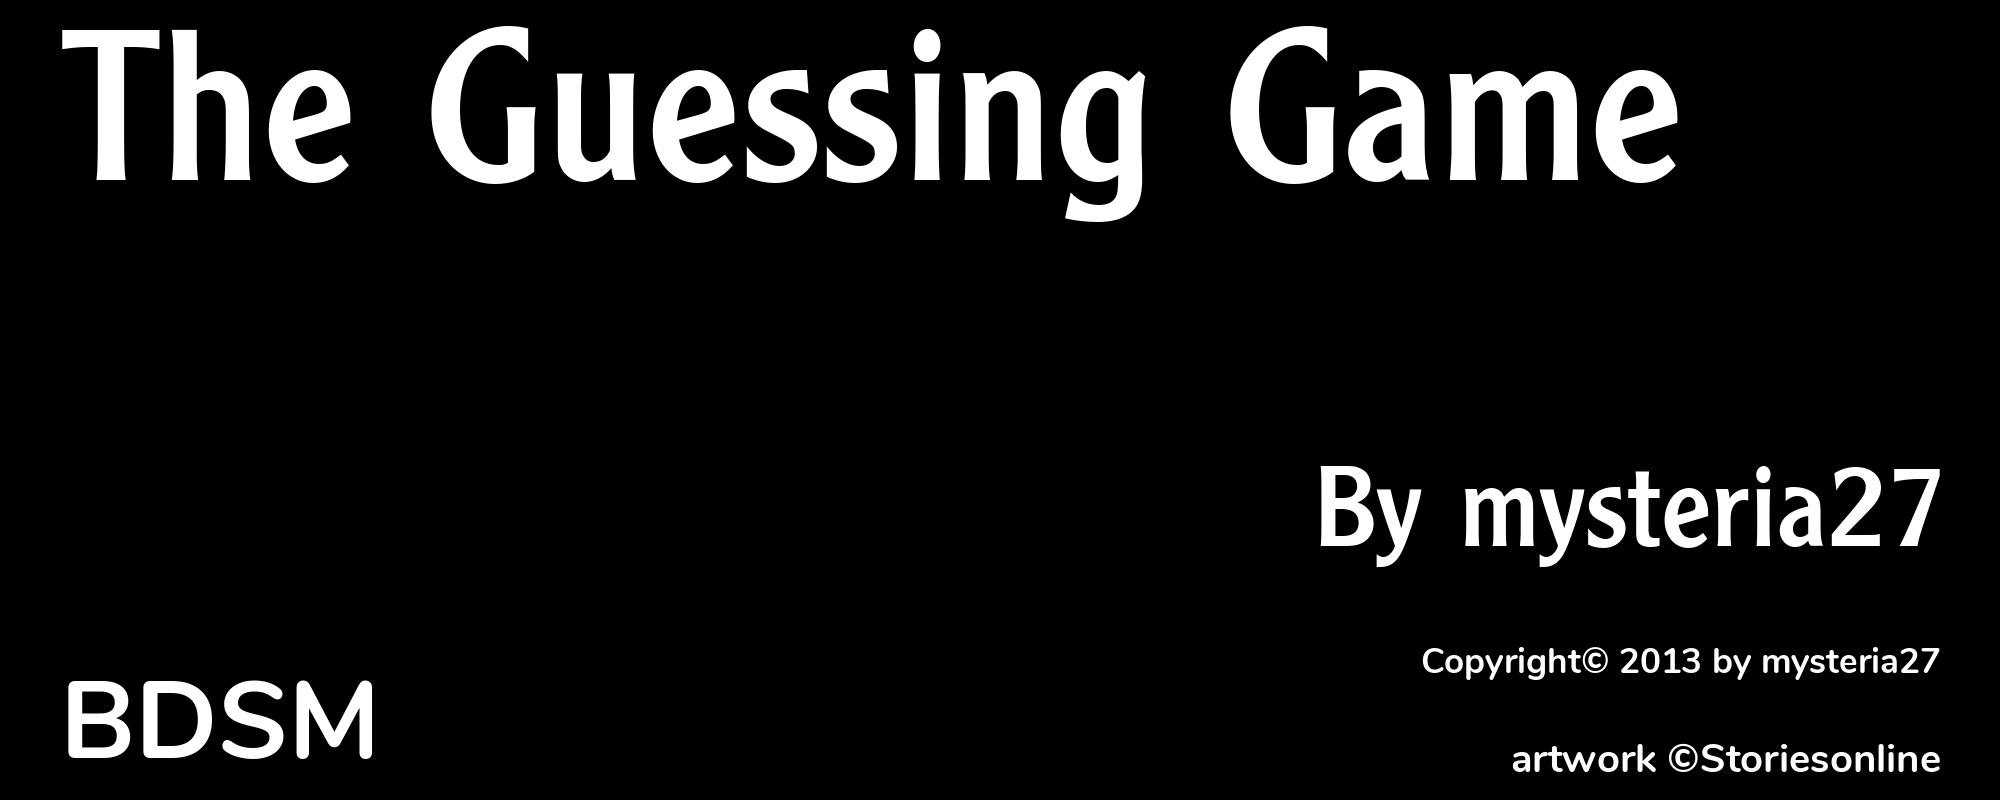 The Guessing Game - Cover